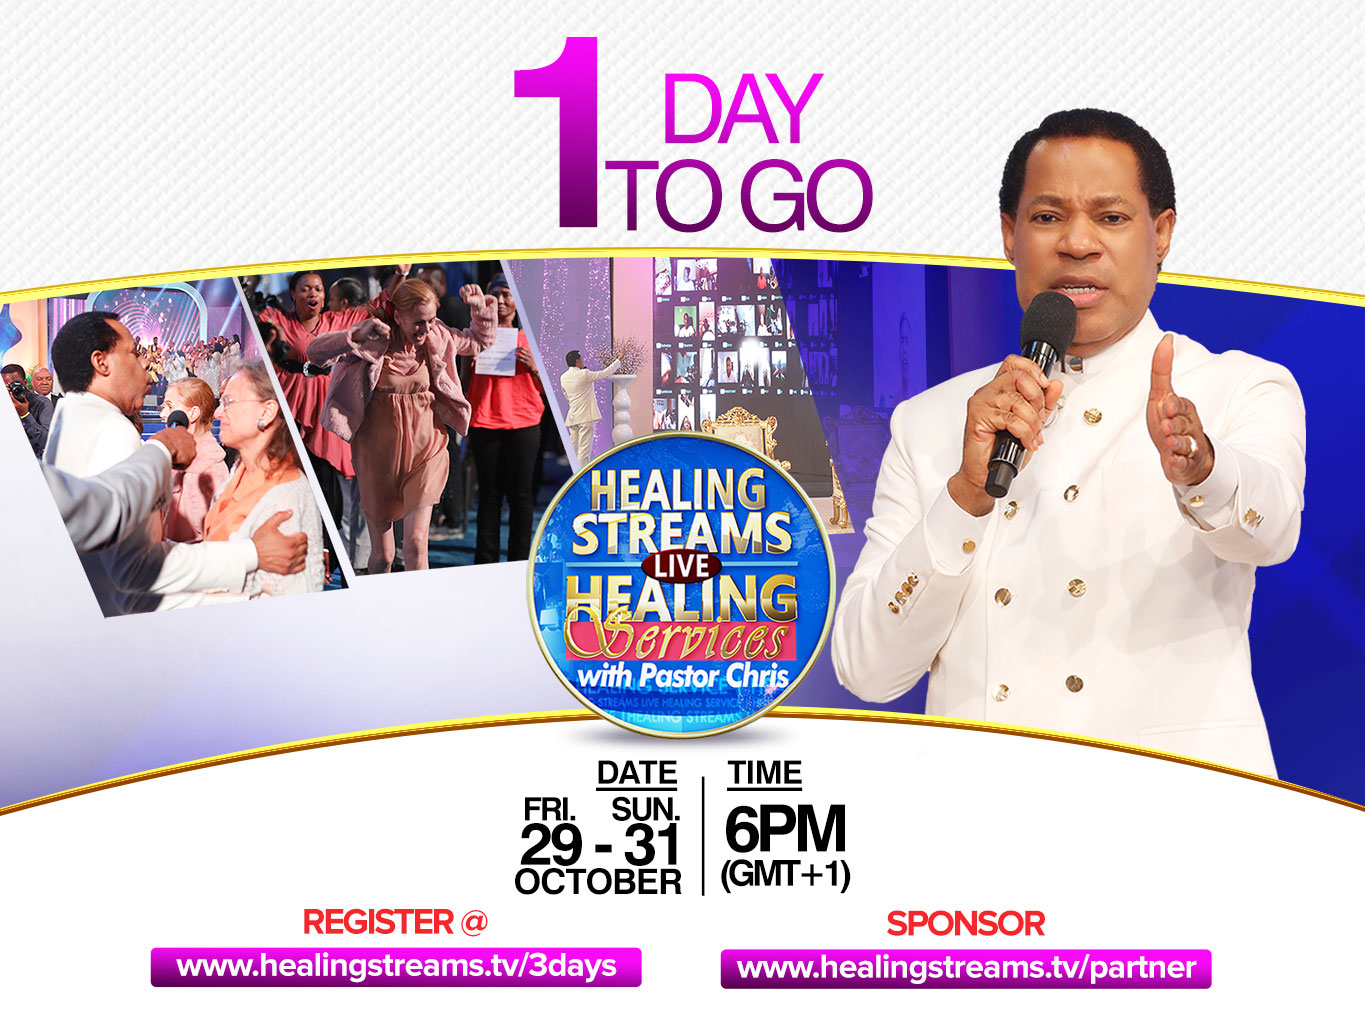 IT'S 24 HOURS TO THE HEALING STREAMS LIVE HEALING SERVICE WITH PASTOR CHRIS